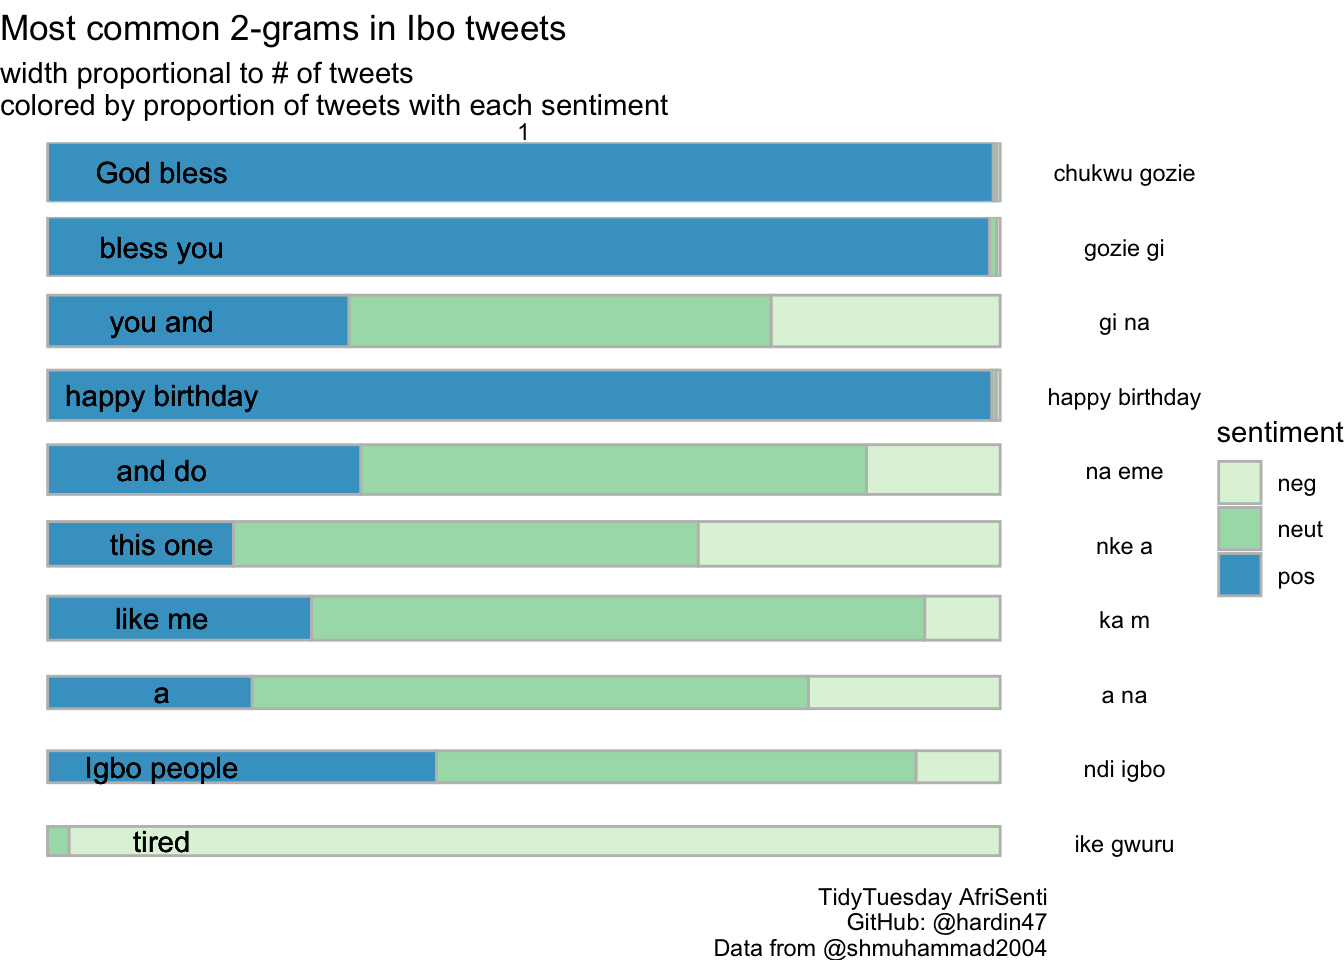 Using only the Ibo tweets, we find the 10 most common 2-grams.  In a bar plot, the width of the bar is determined by the popularity of the 2-gram and the bar is filled with the relative proportion of positive, neutral, and negative sentiments for each 2-gram.